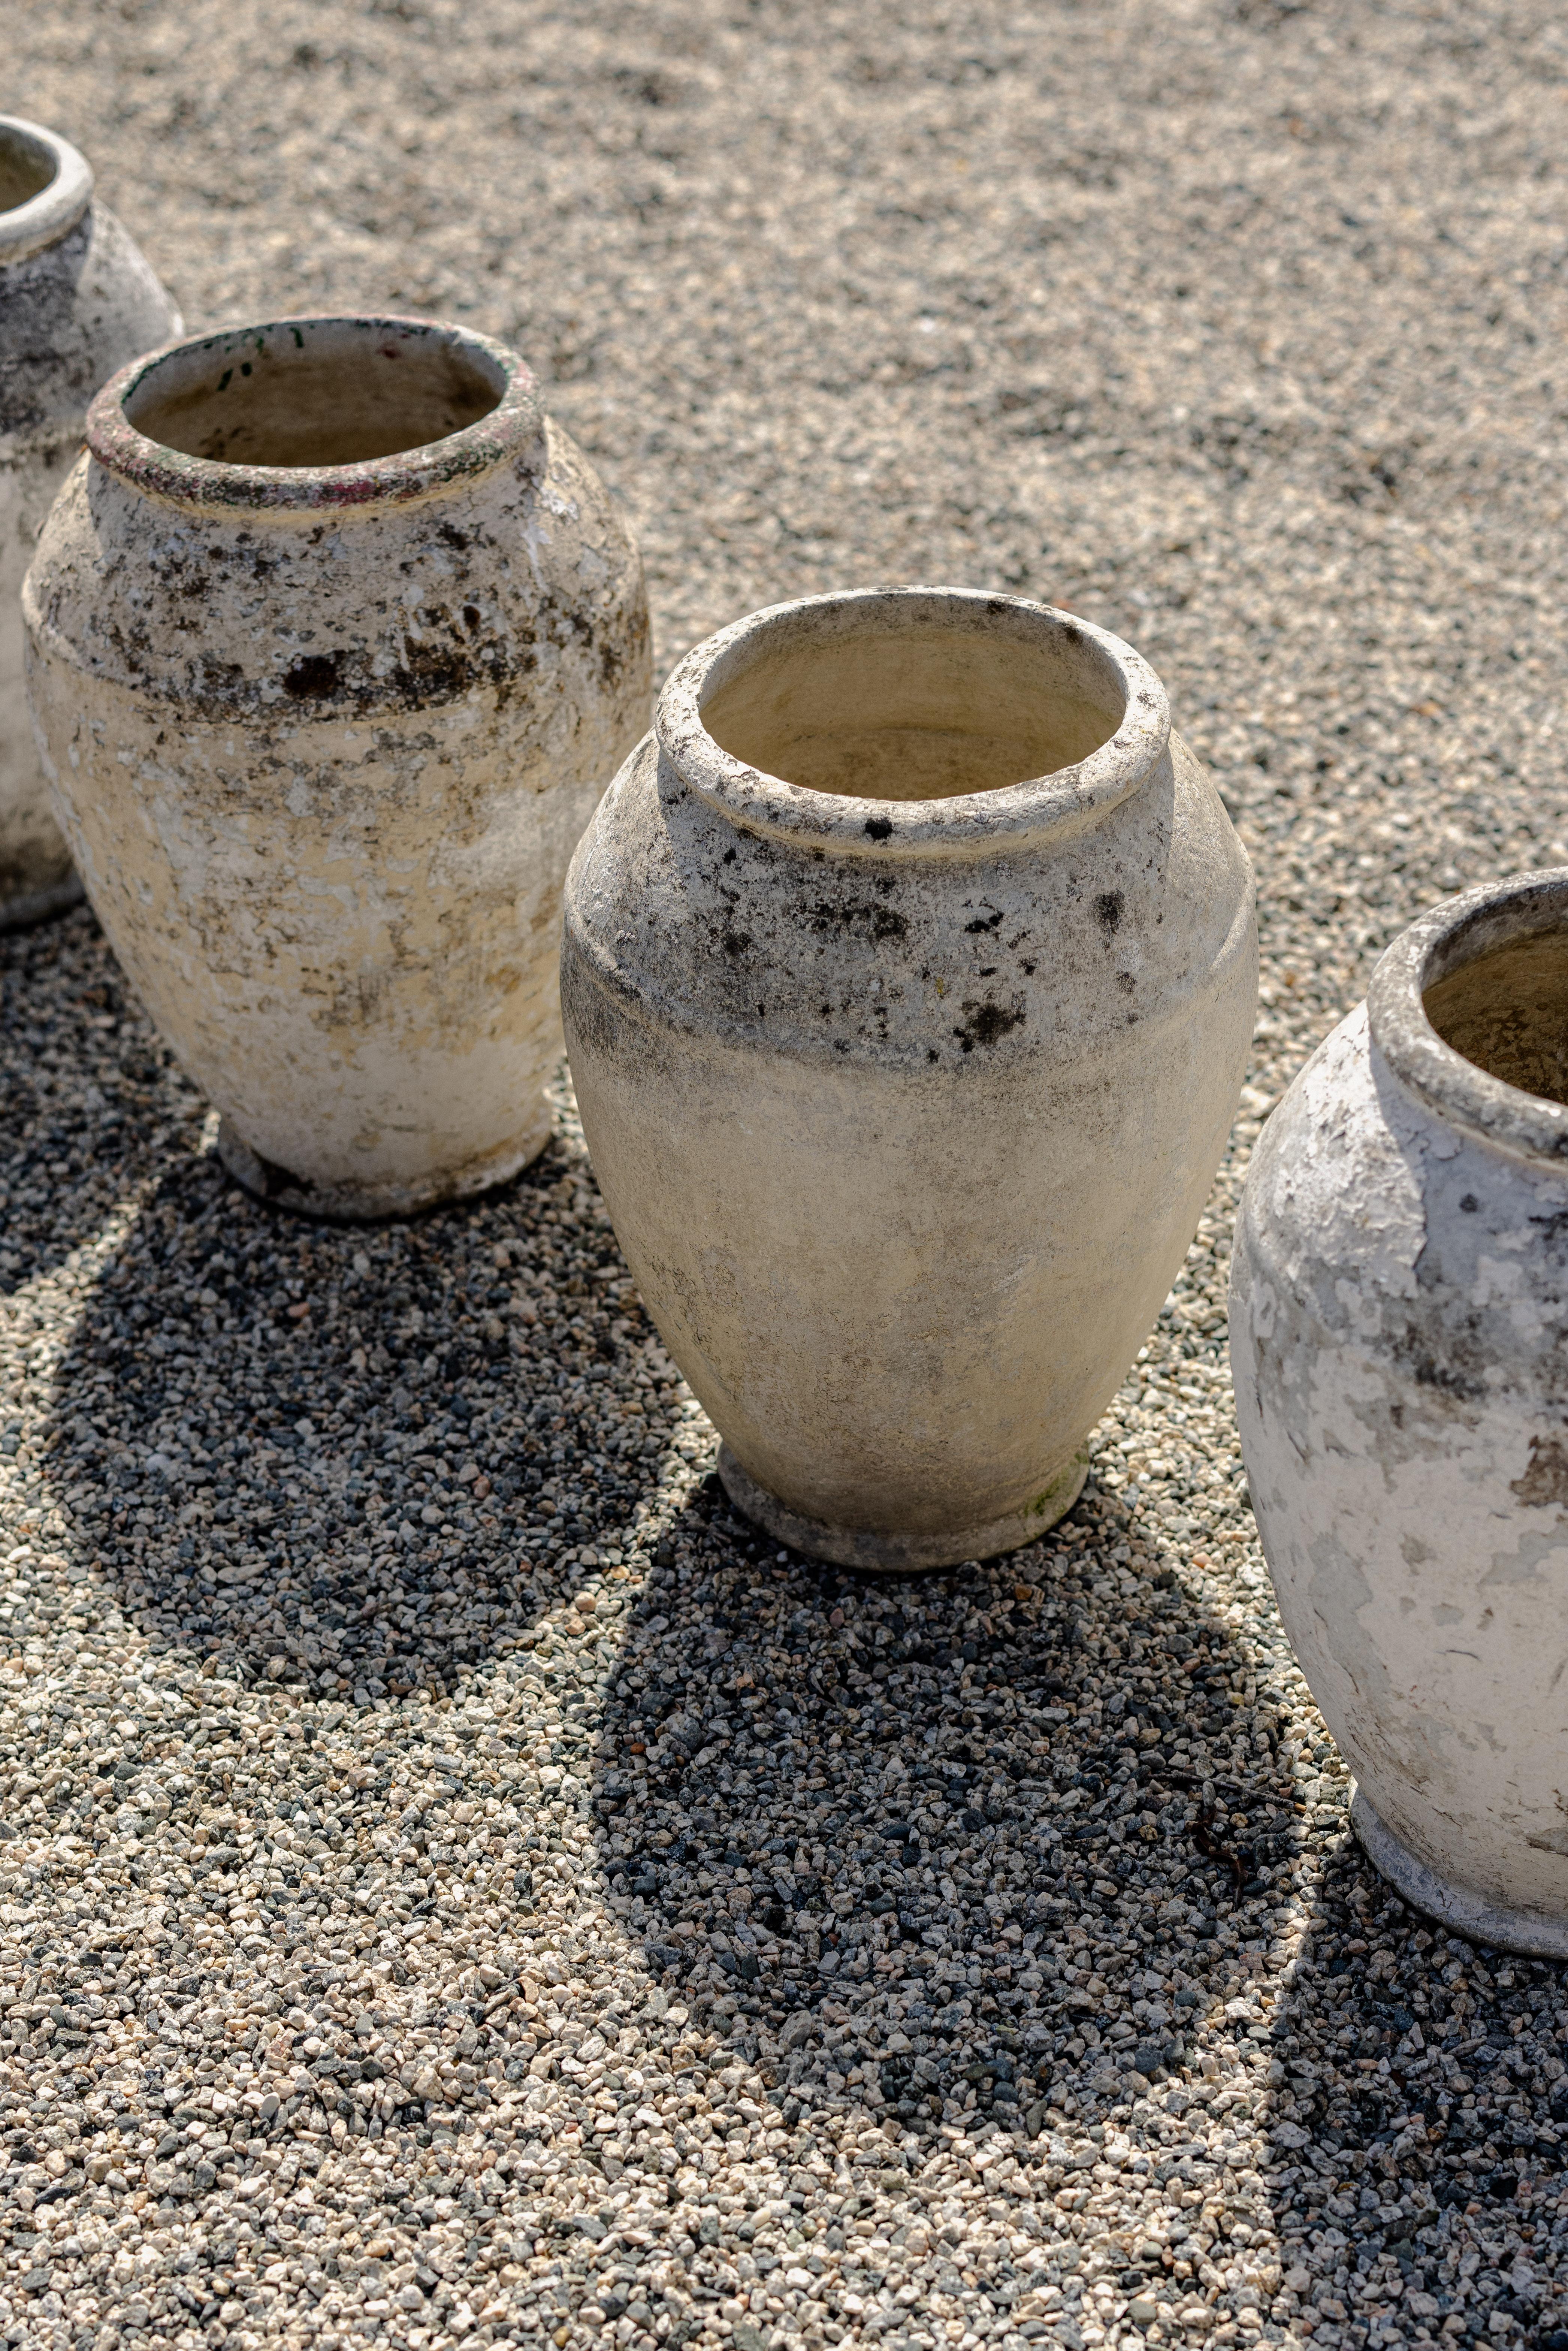 A Collection of Large Concrete Vases by Willy Guhl, 1960's, Switzerland

H 20.5